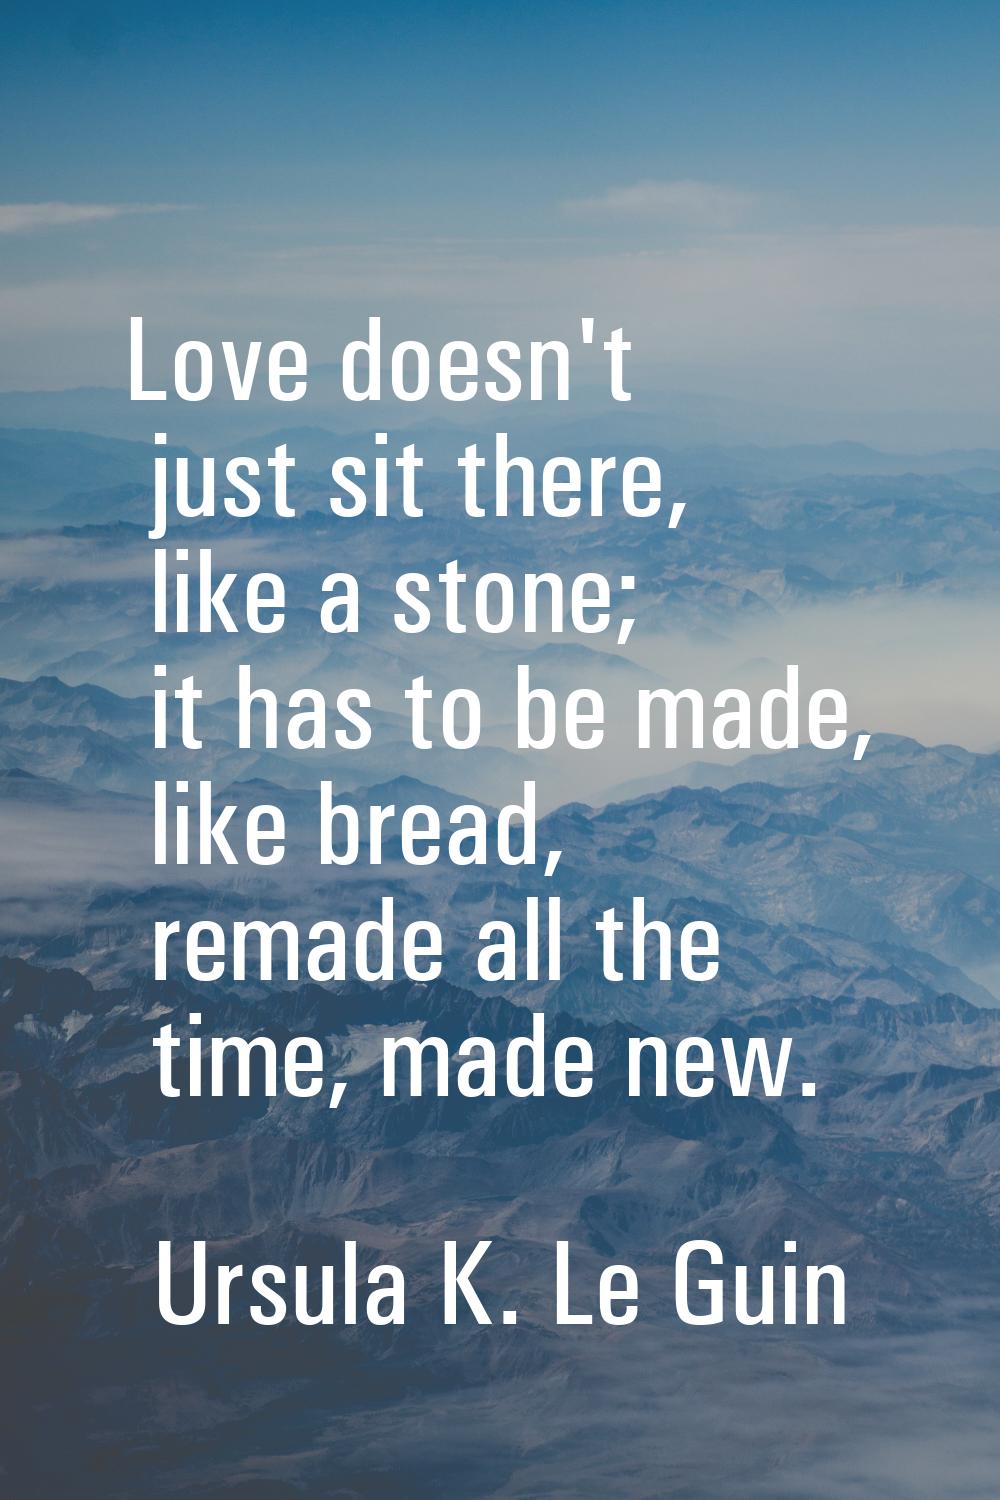 Love doesn't just sit there, like a stone; it has to be made, like bread, remade all the time, made